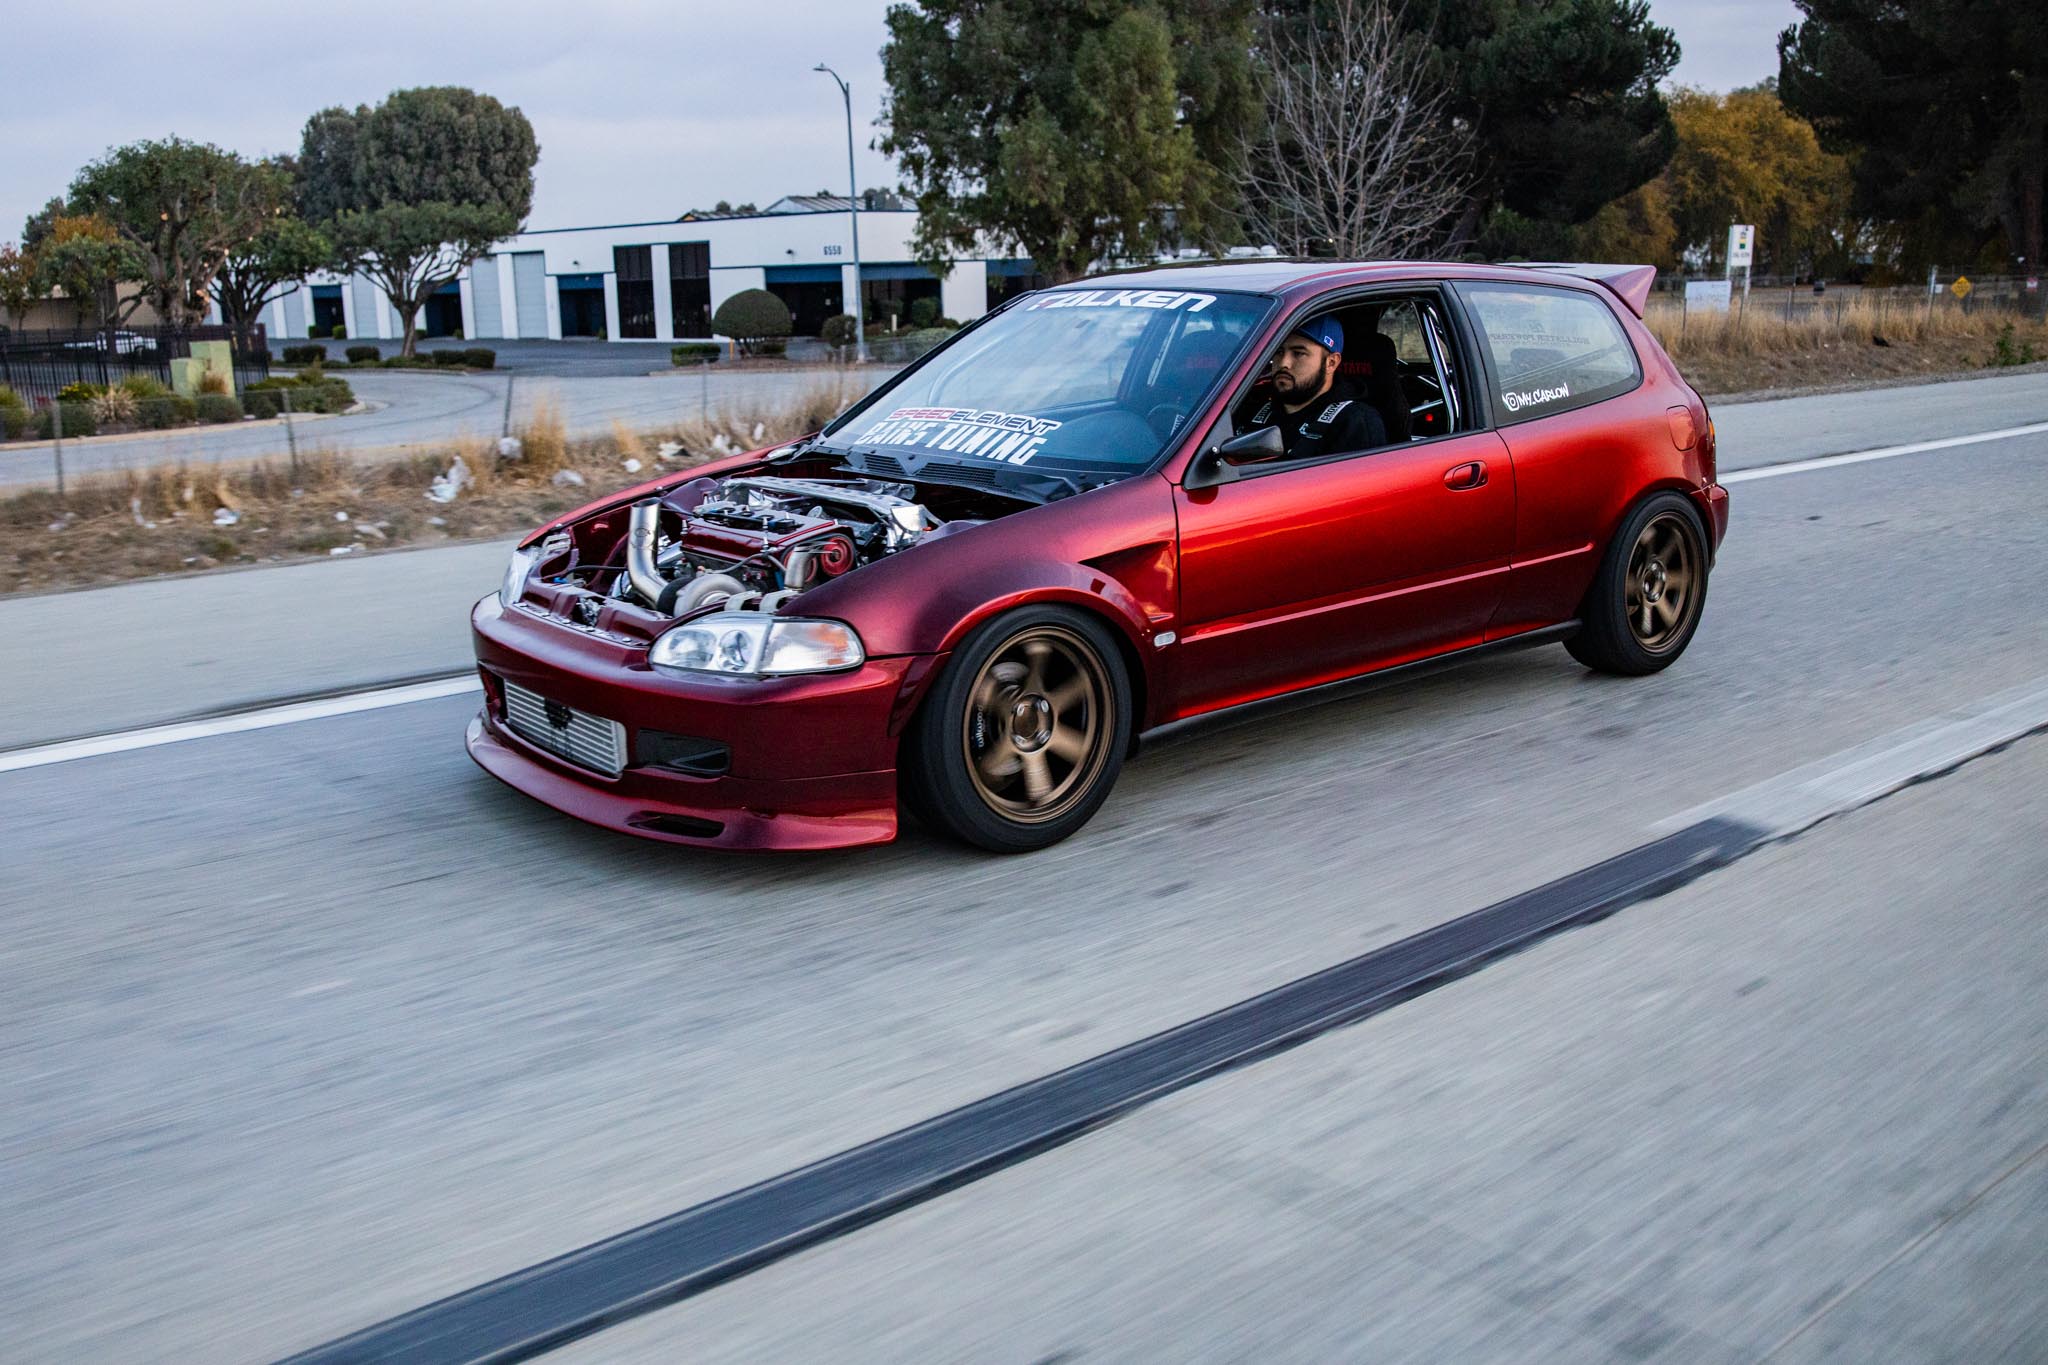 Boosted B18 Civic